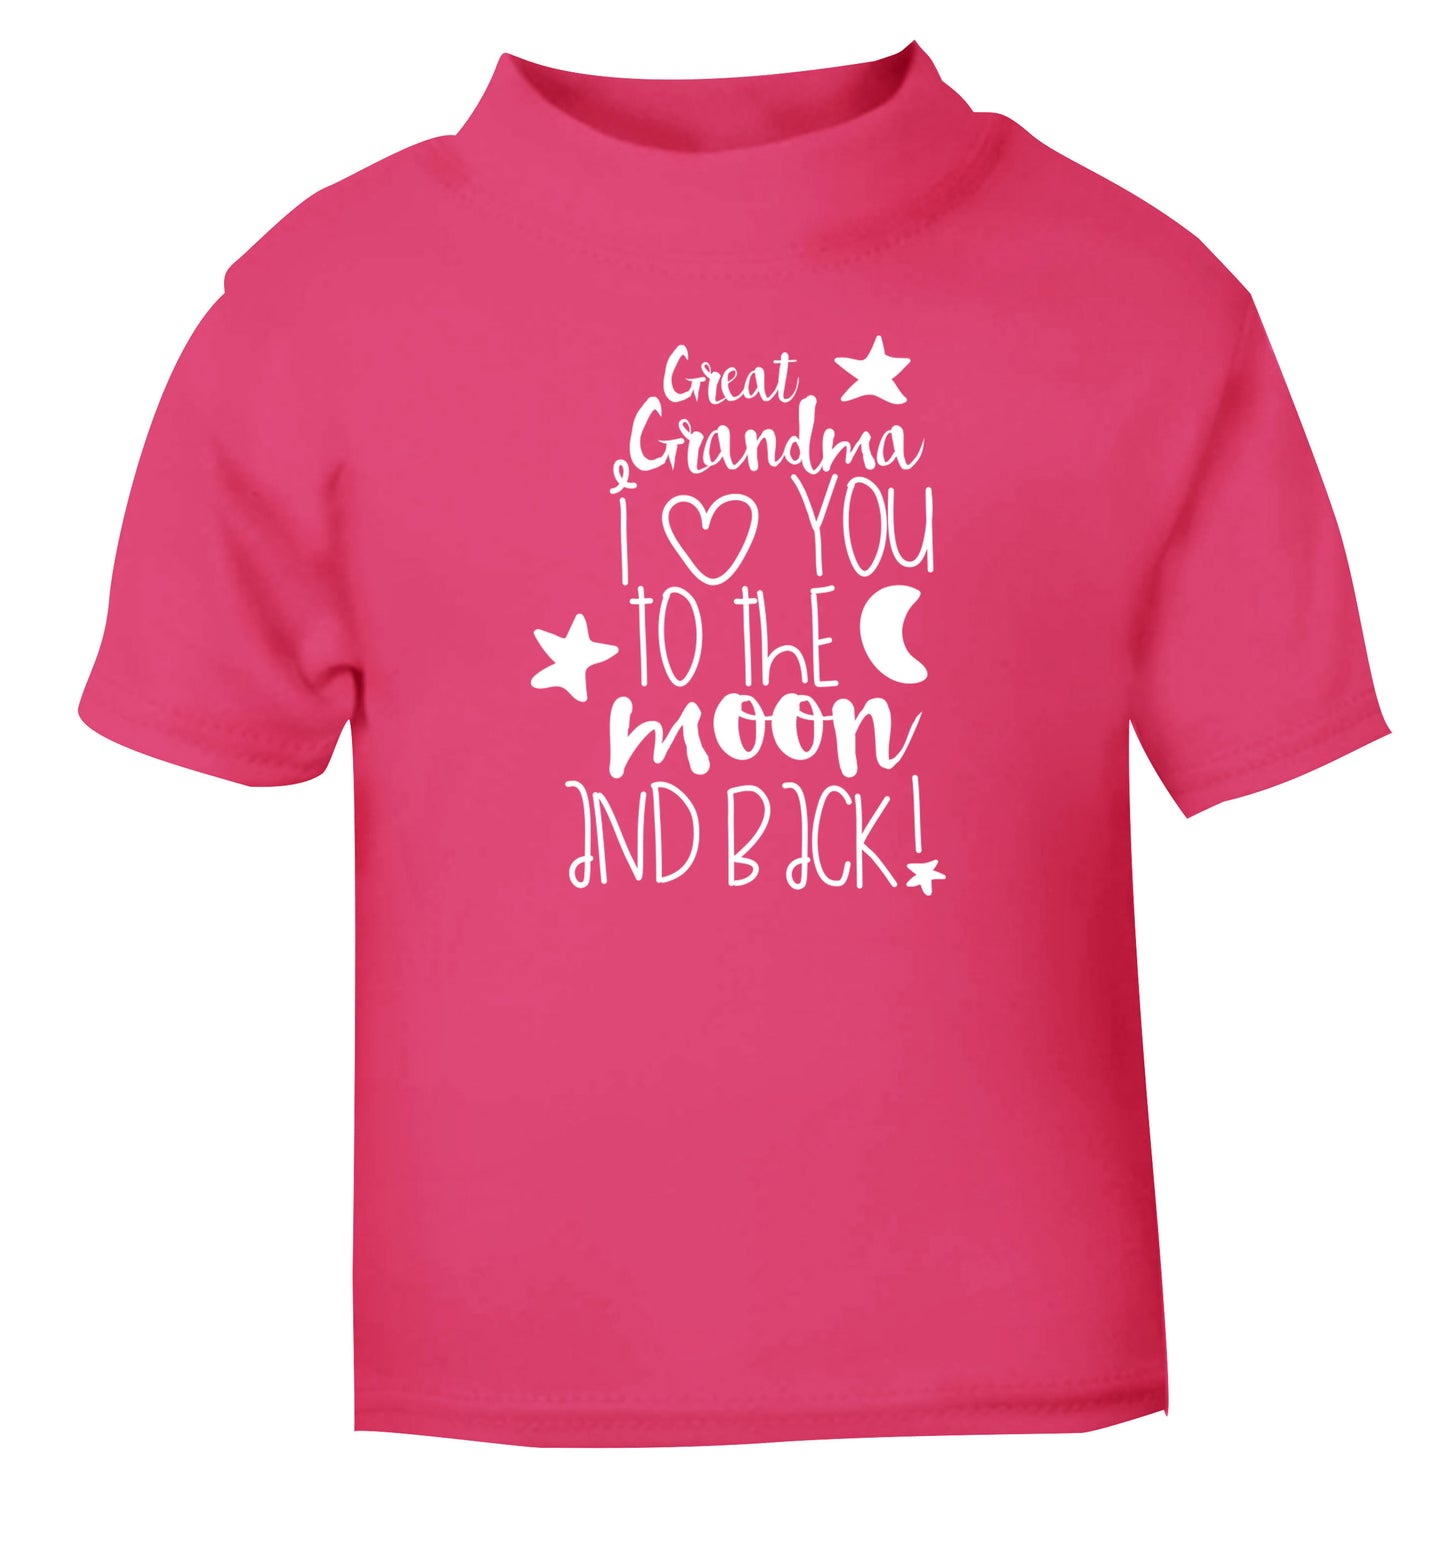 Great Grandma I love you to the moon and back pink Baby Toddler Tshirt 2 Years